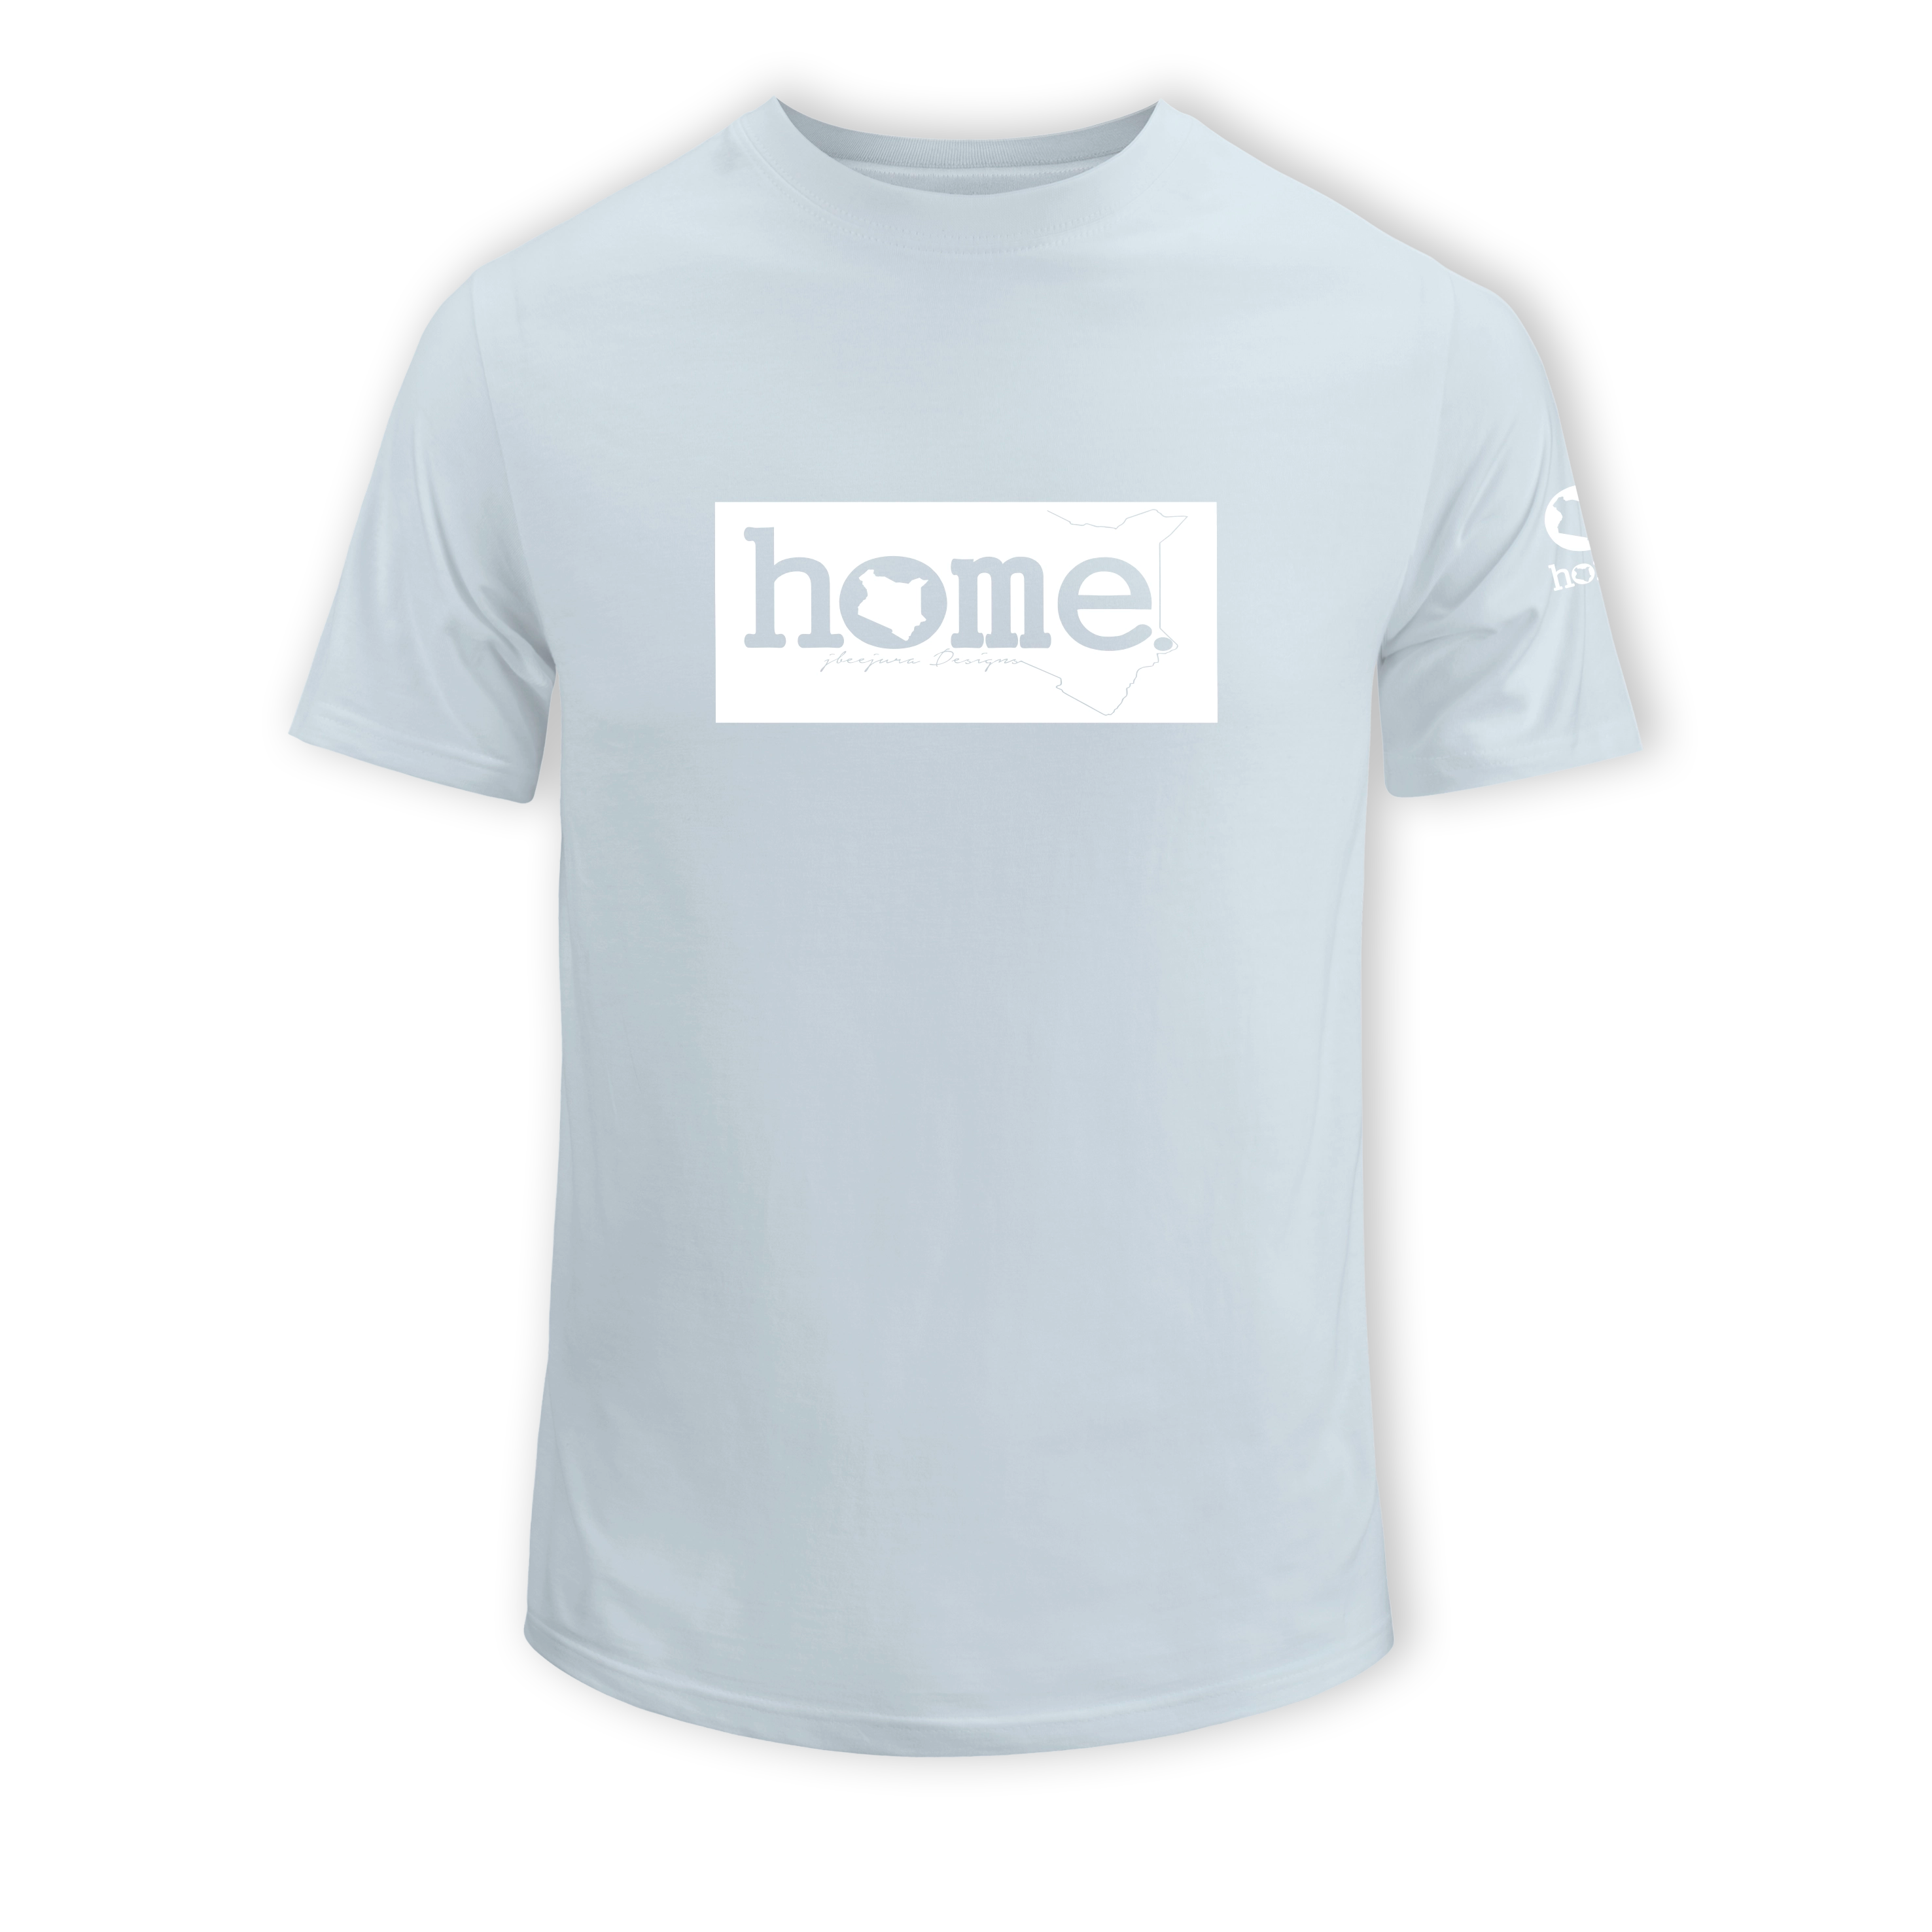 home_254 SHORT-SLEEVED SKY-BLUE T-SHIRT WITH A WHITE CLASSIC PRINT – COTTON PLUS FABRIC